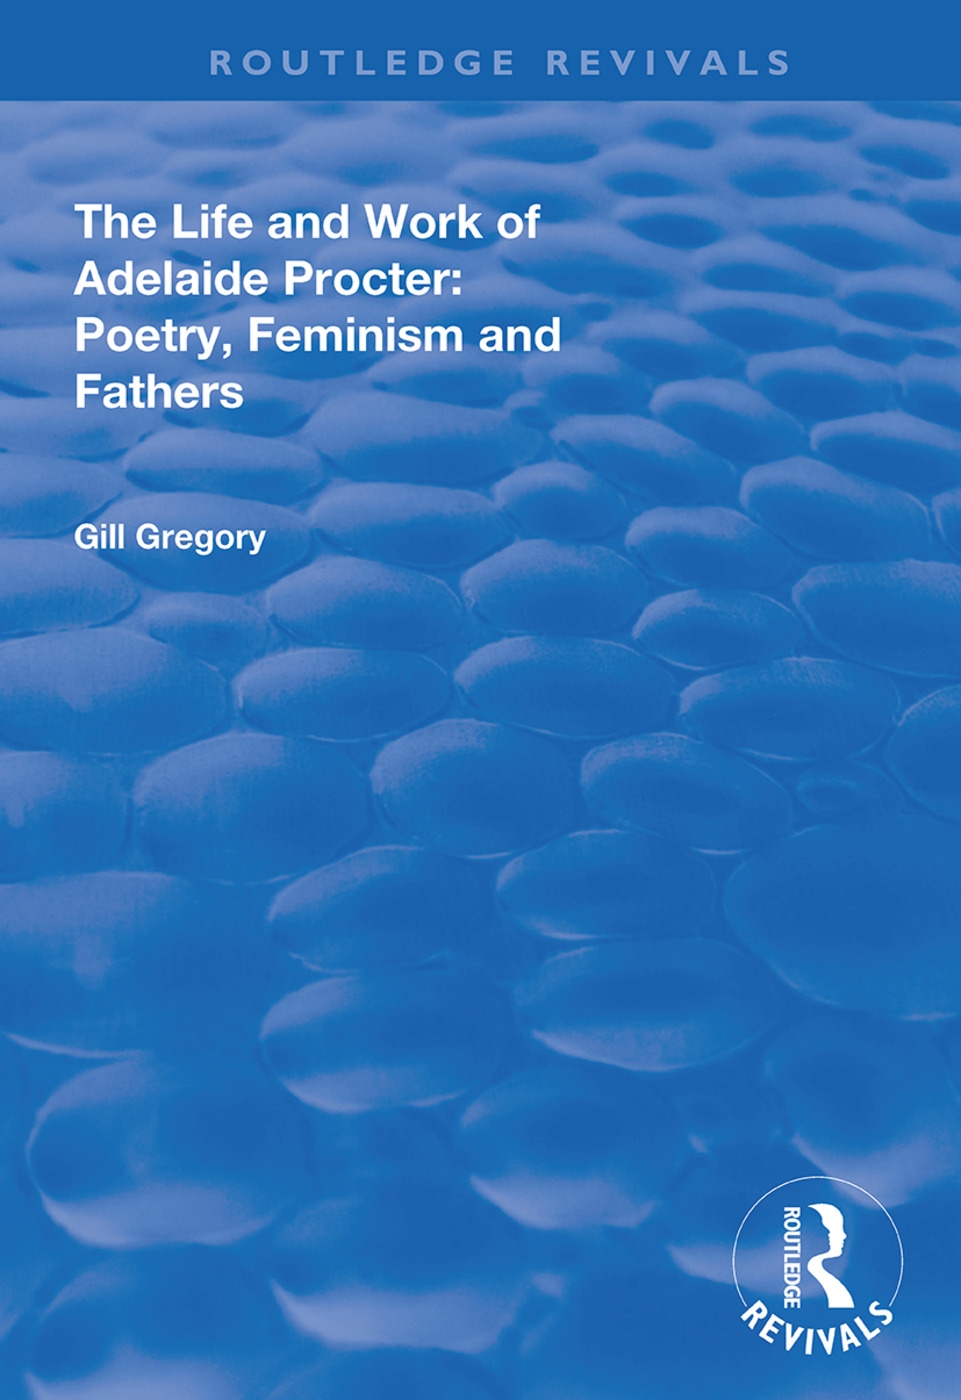 The Life and Work of Adelaide Procter: Poetry, Feminism and Fathers